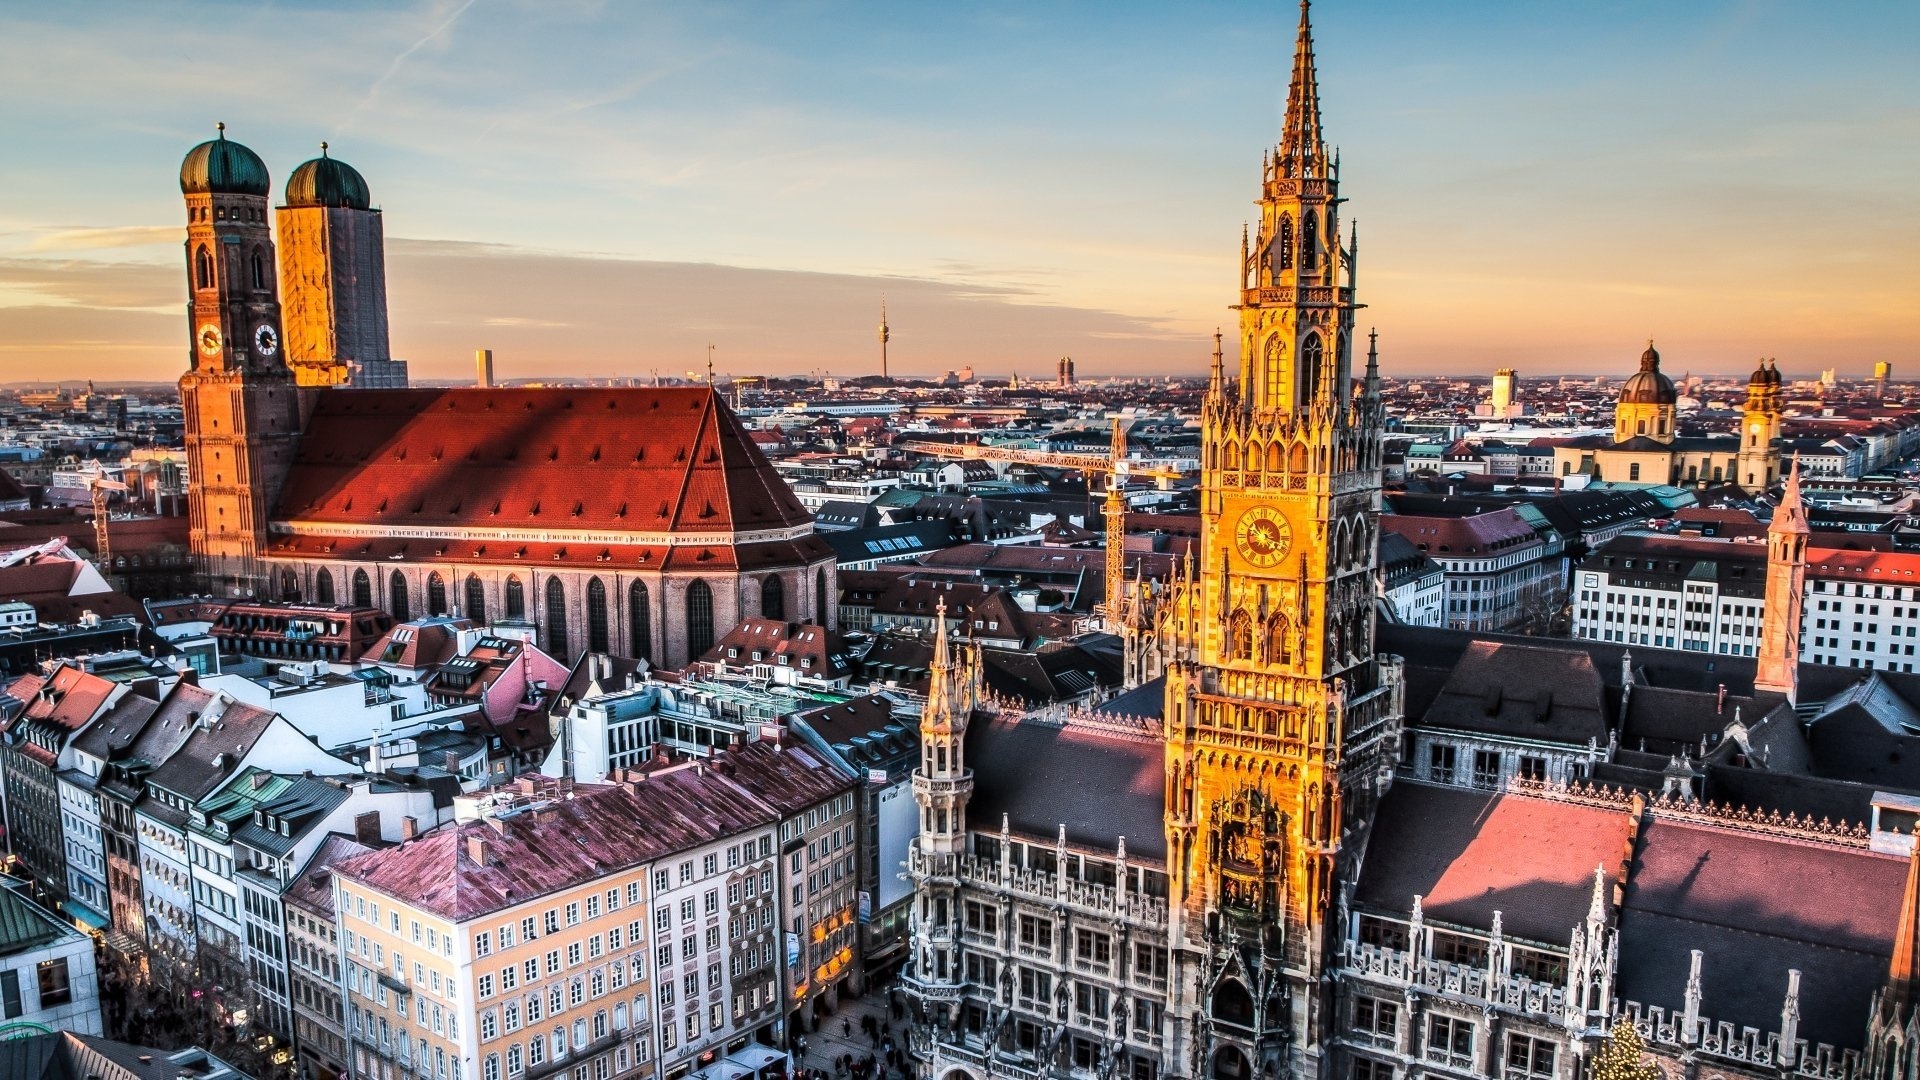 Munich: The city became the capital of Bavaria under the ruling Wittelsbach family. 1920x1080 Full HD Wallpaper.